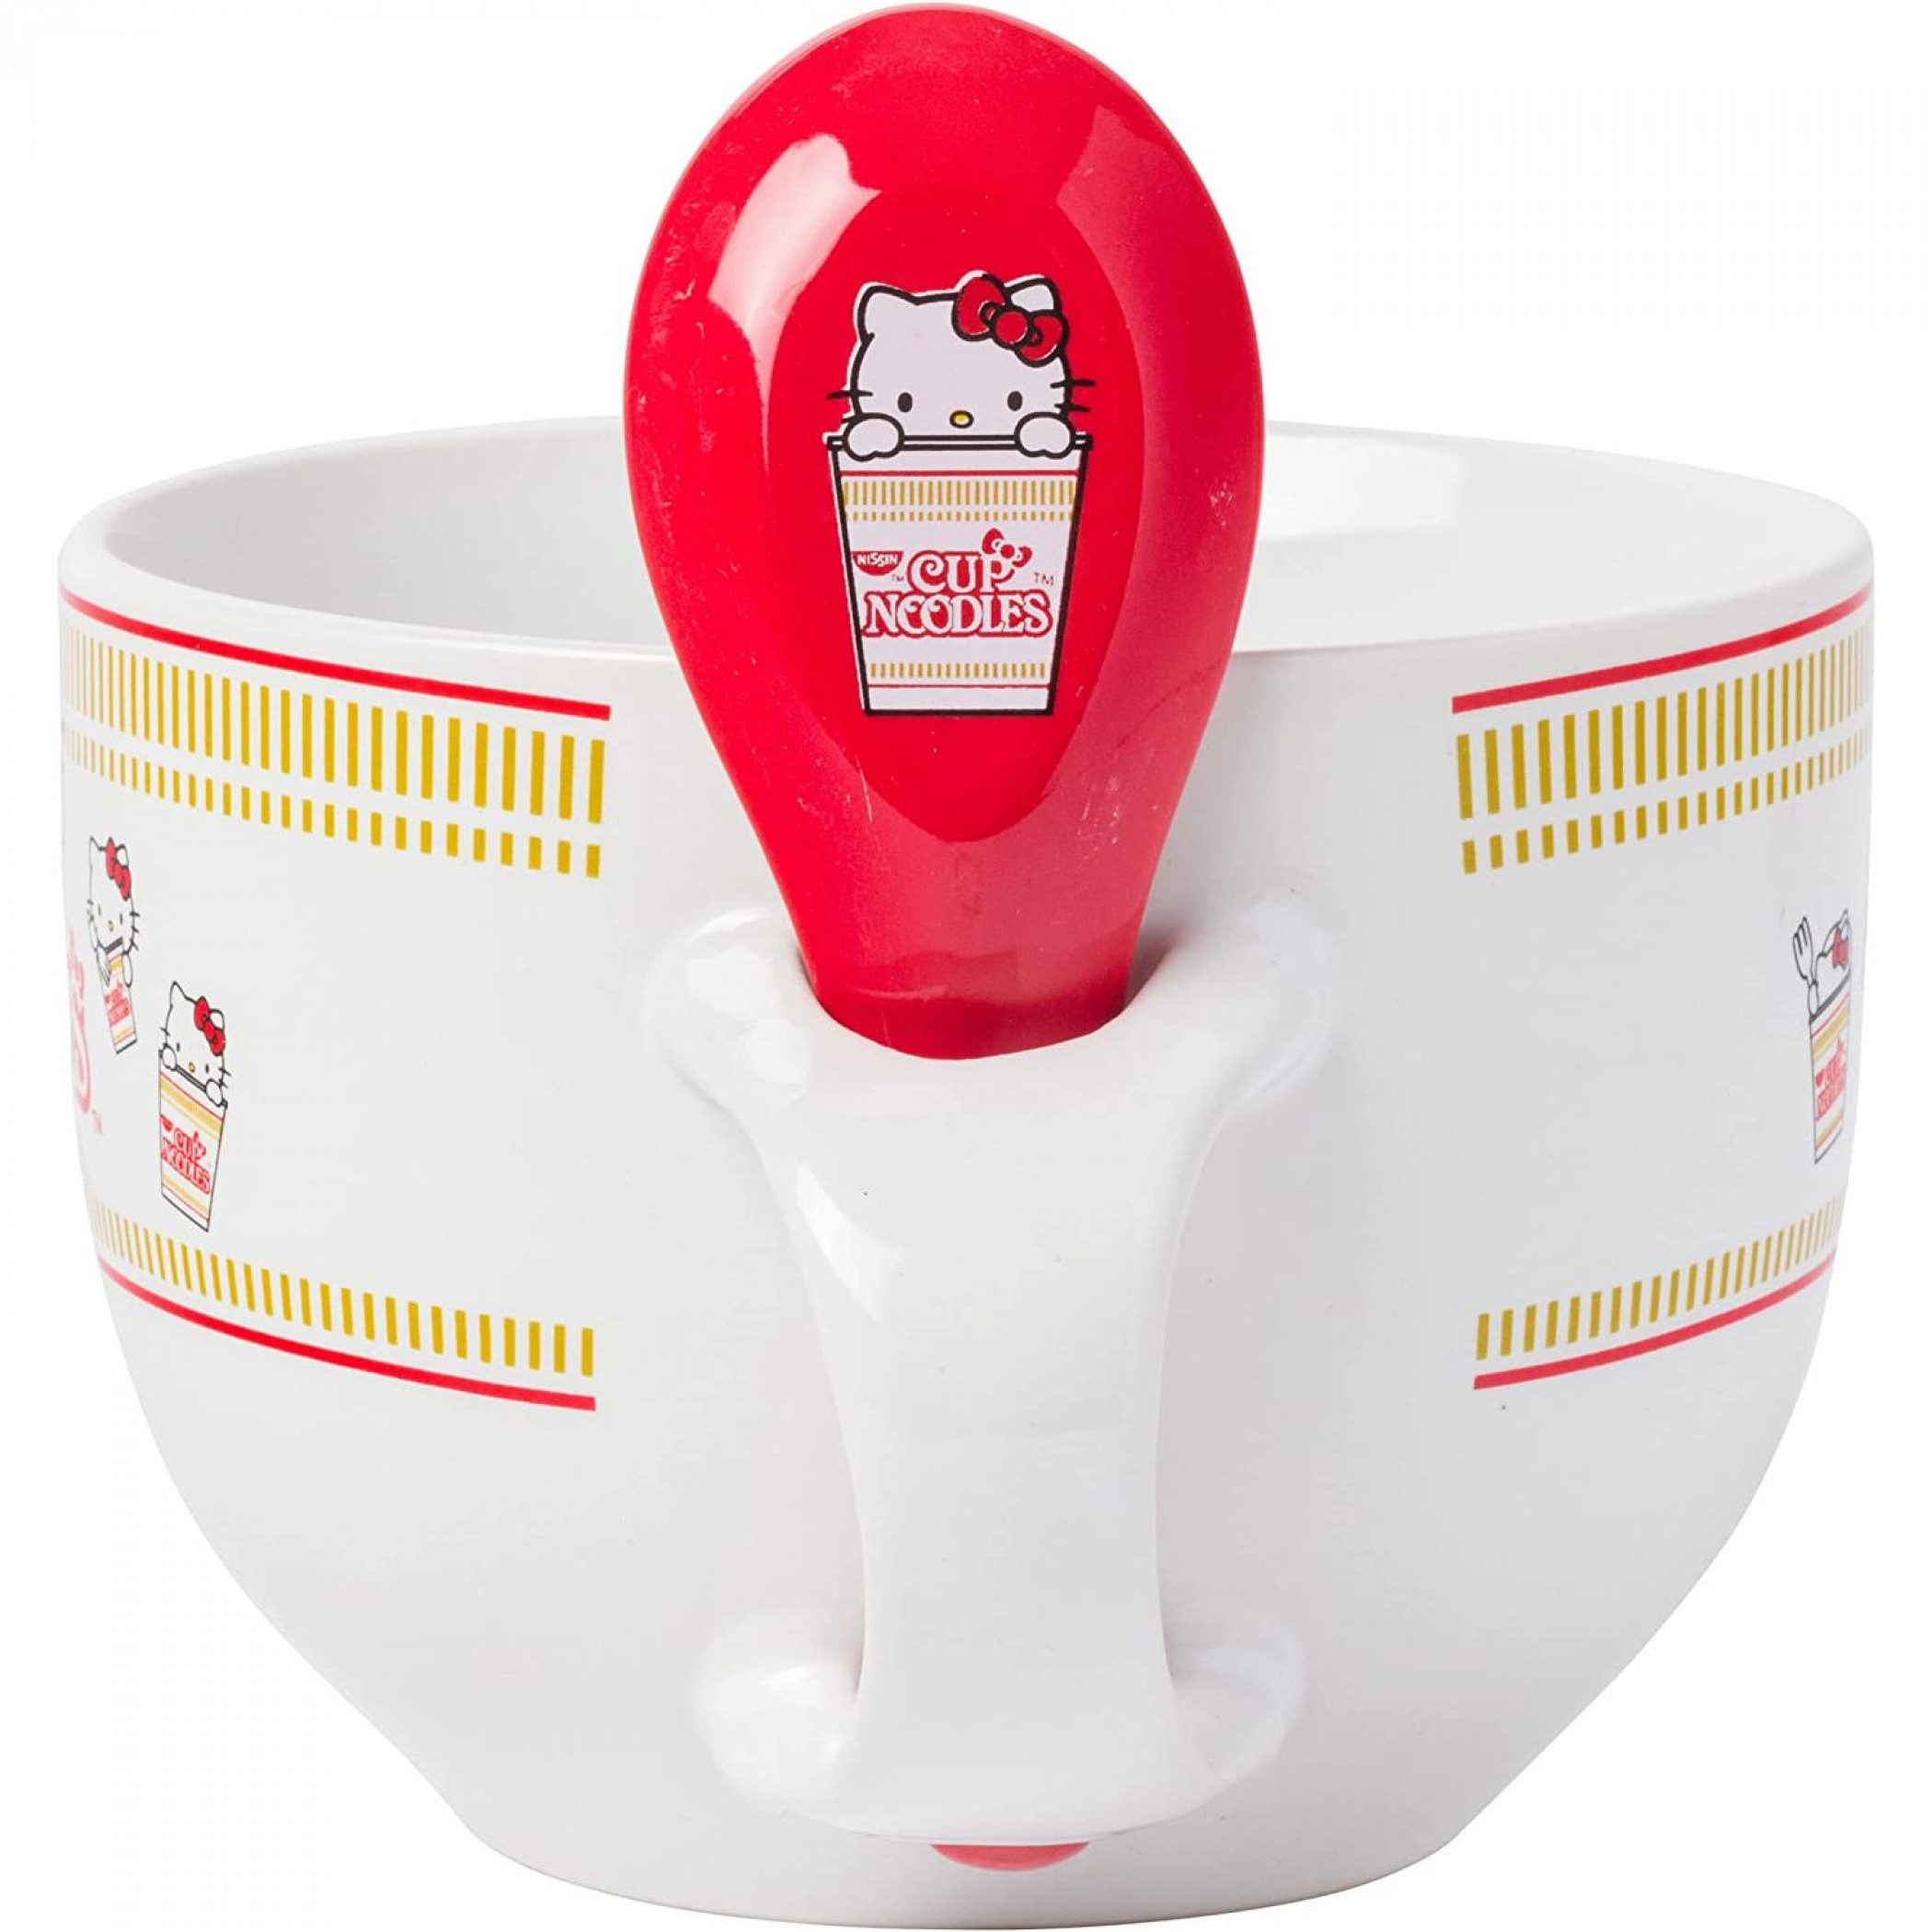 Hello Kitty X Cup Noodles Ceramic Soup Mug with Spoon